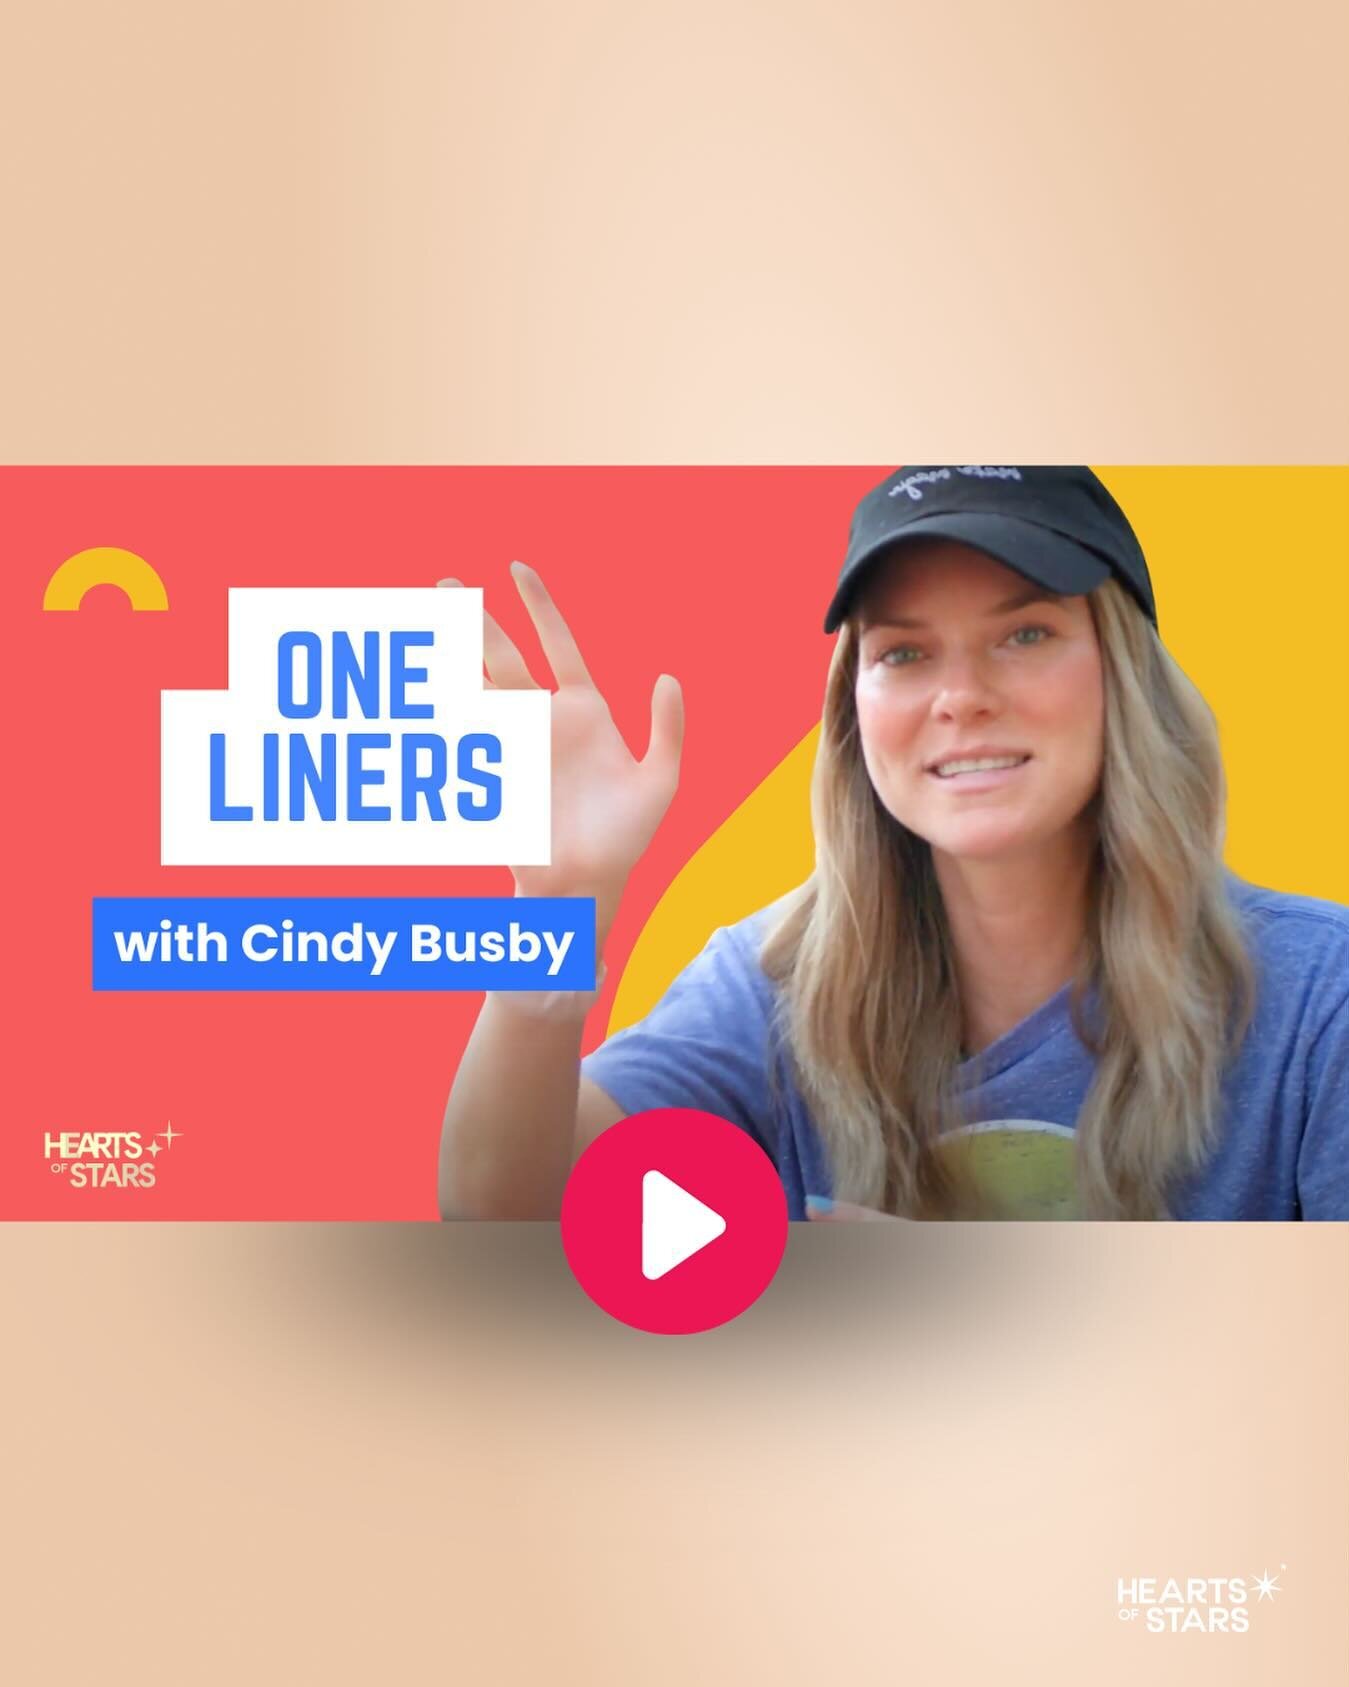 Need a little dose of Cindy Busby fun to keep the excitement going before our big virtual event on Saturday? We've gotcha! 🎉

Check out our YouTube channel for some awesome mini-episodes starring Cindy. It's like a sneak peek of the fun we'll have t